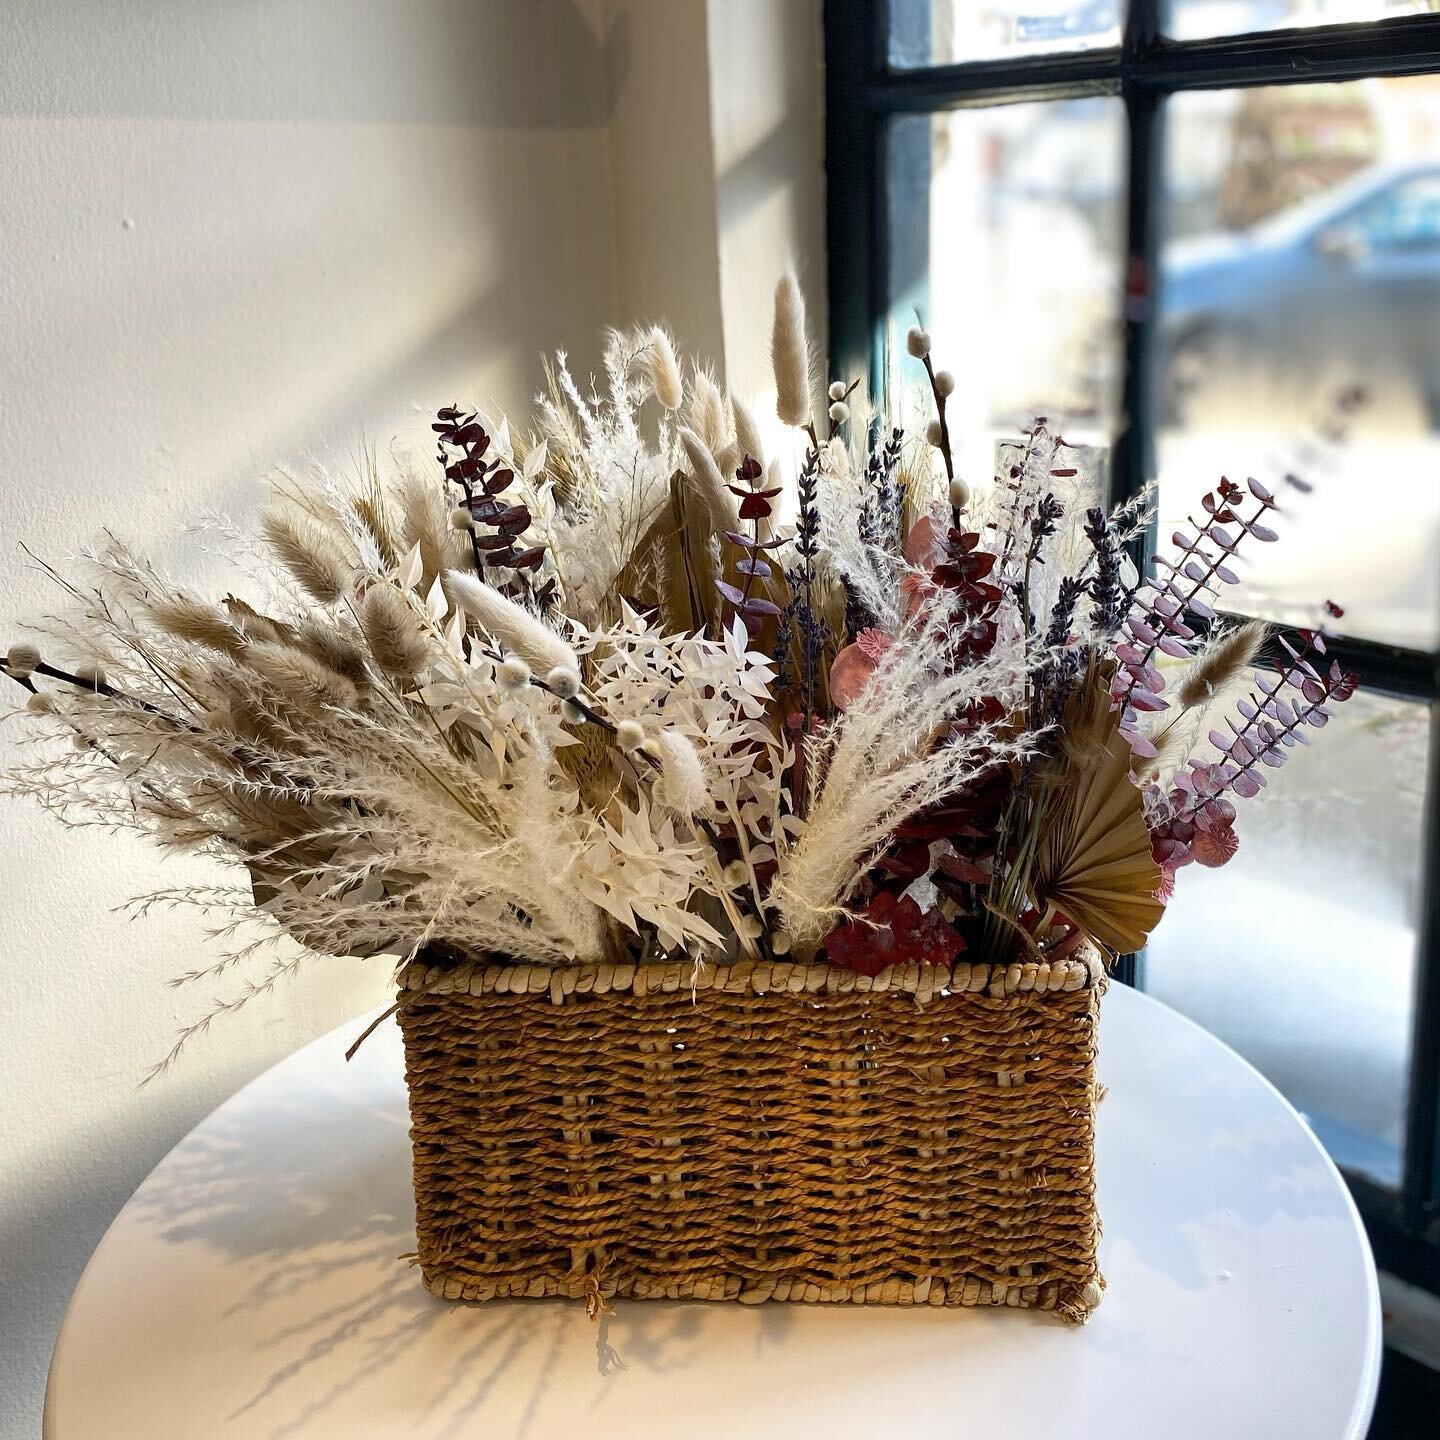 F L O W E R S

It&rsquo;s that time of year again. These beautiful dried flower posies were dropped off by Hannah today at the shop. Treat yourself, or a friend, or loved one &hearts;️ 

@theflowerhuttetbury 

#valentinesday #galentinesday #lovefrien